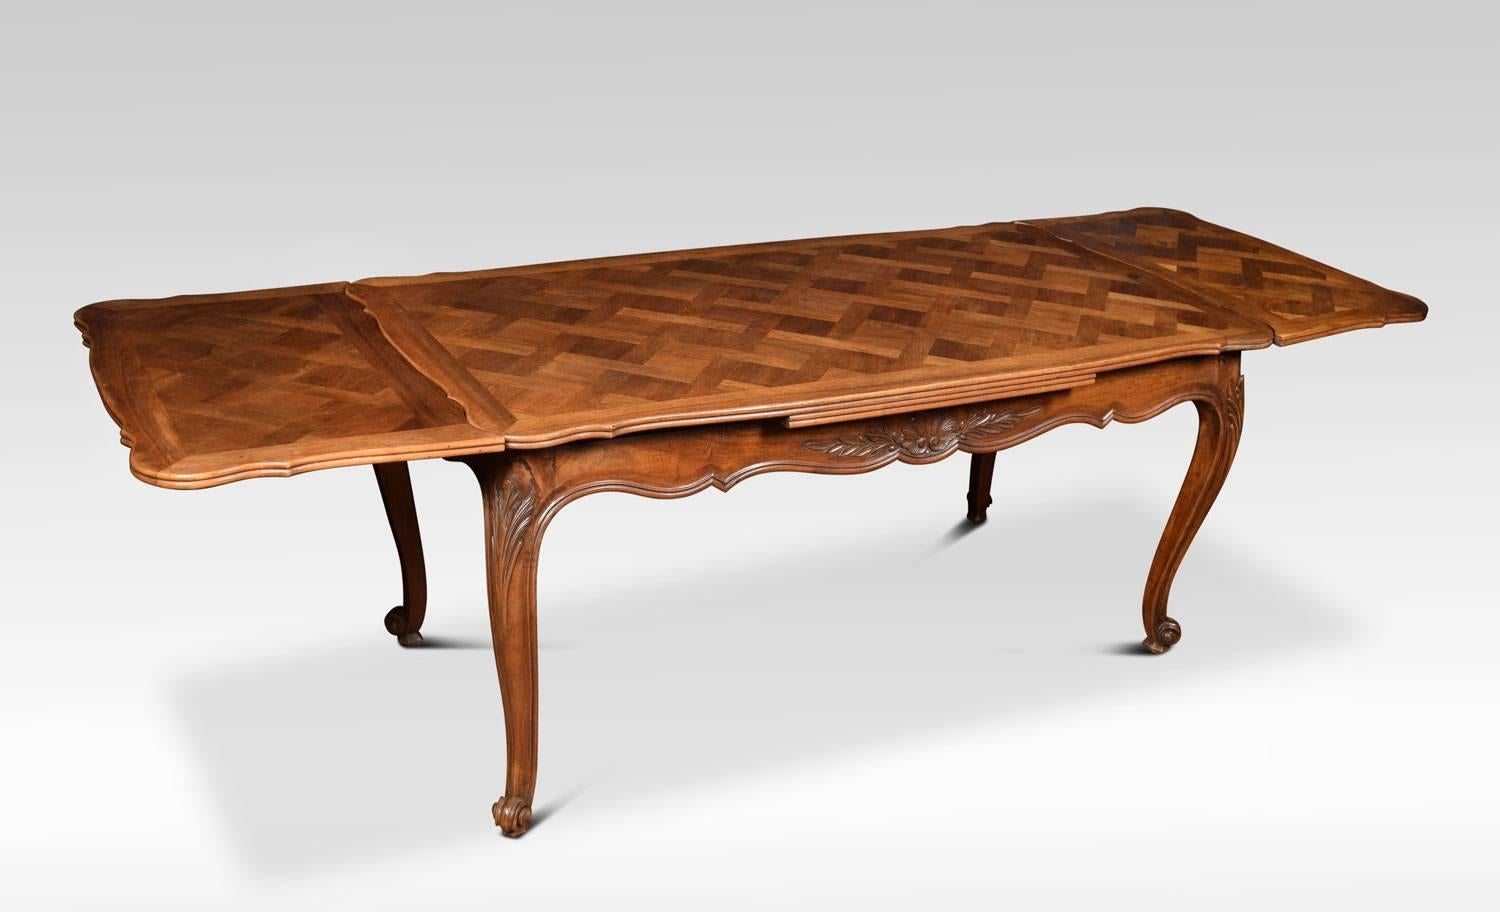 French Provincial style draw-leaf dining table, the serpentine walnut parquet top with two pull-out leaves above shaped carved apron. All raised up on cabriole legs terminating on upswept feet.
Dimensions:
Height 30.5 inches
Length 67 inches when